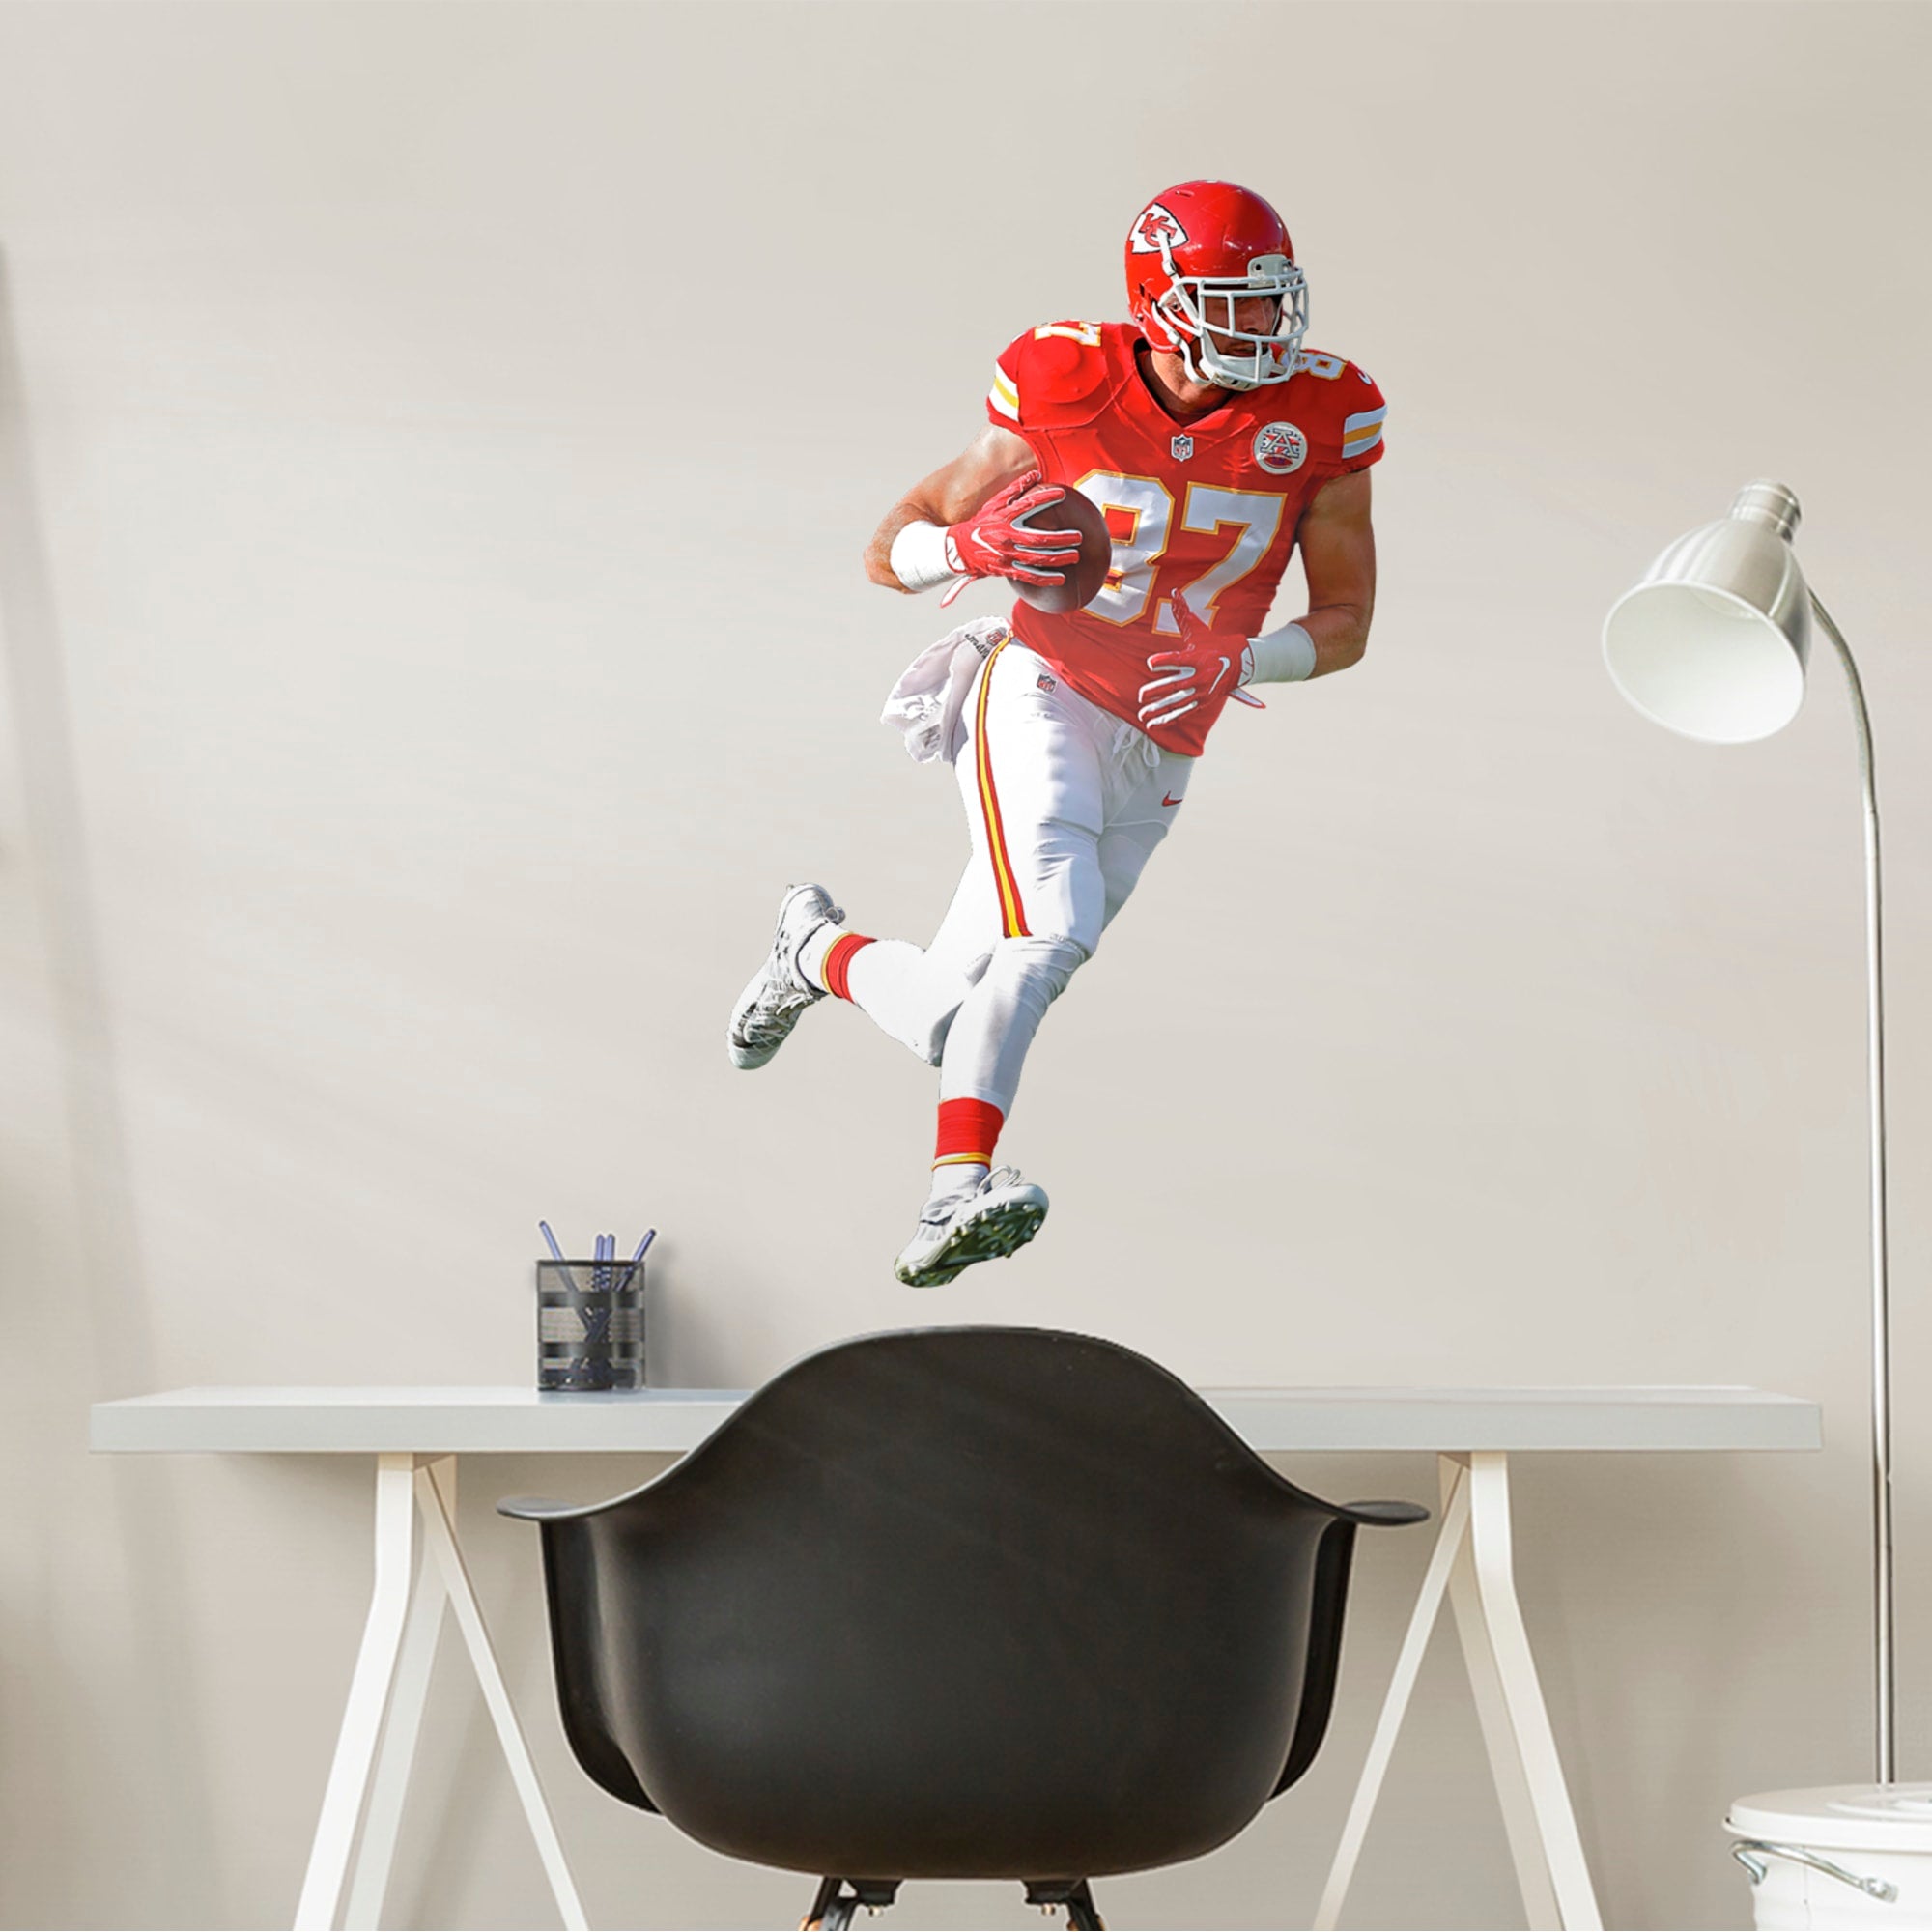 Travis Kelce for Kansas City Chiefs - Officially Licensed NFL Removable Wall Decal 23.0"W x 38.0"H by Fathead | Vinyl